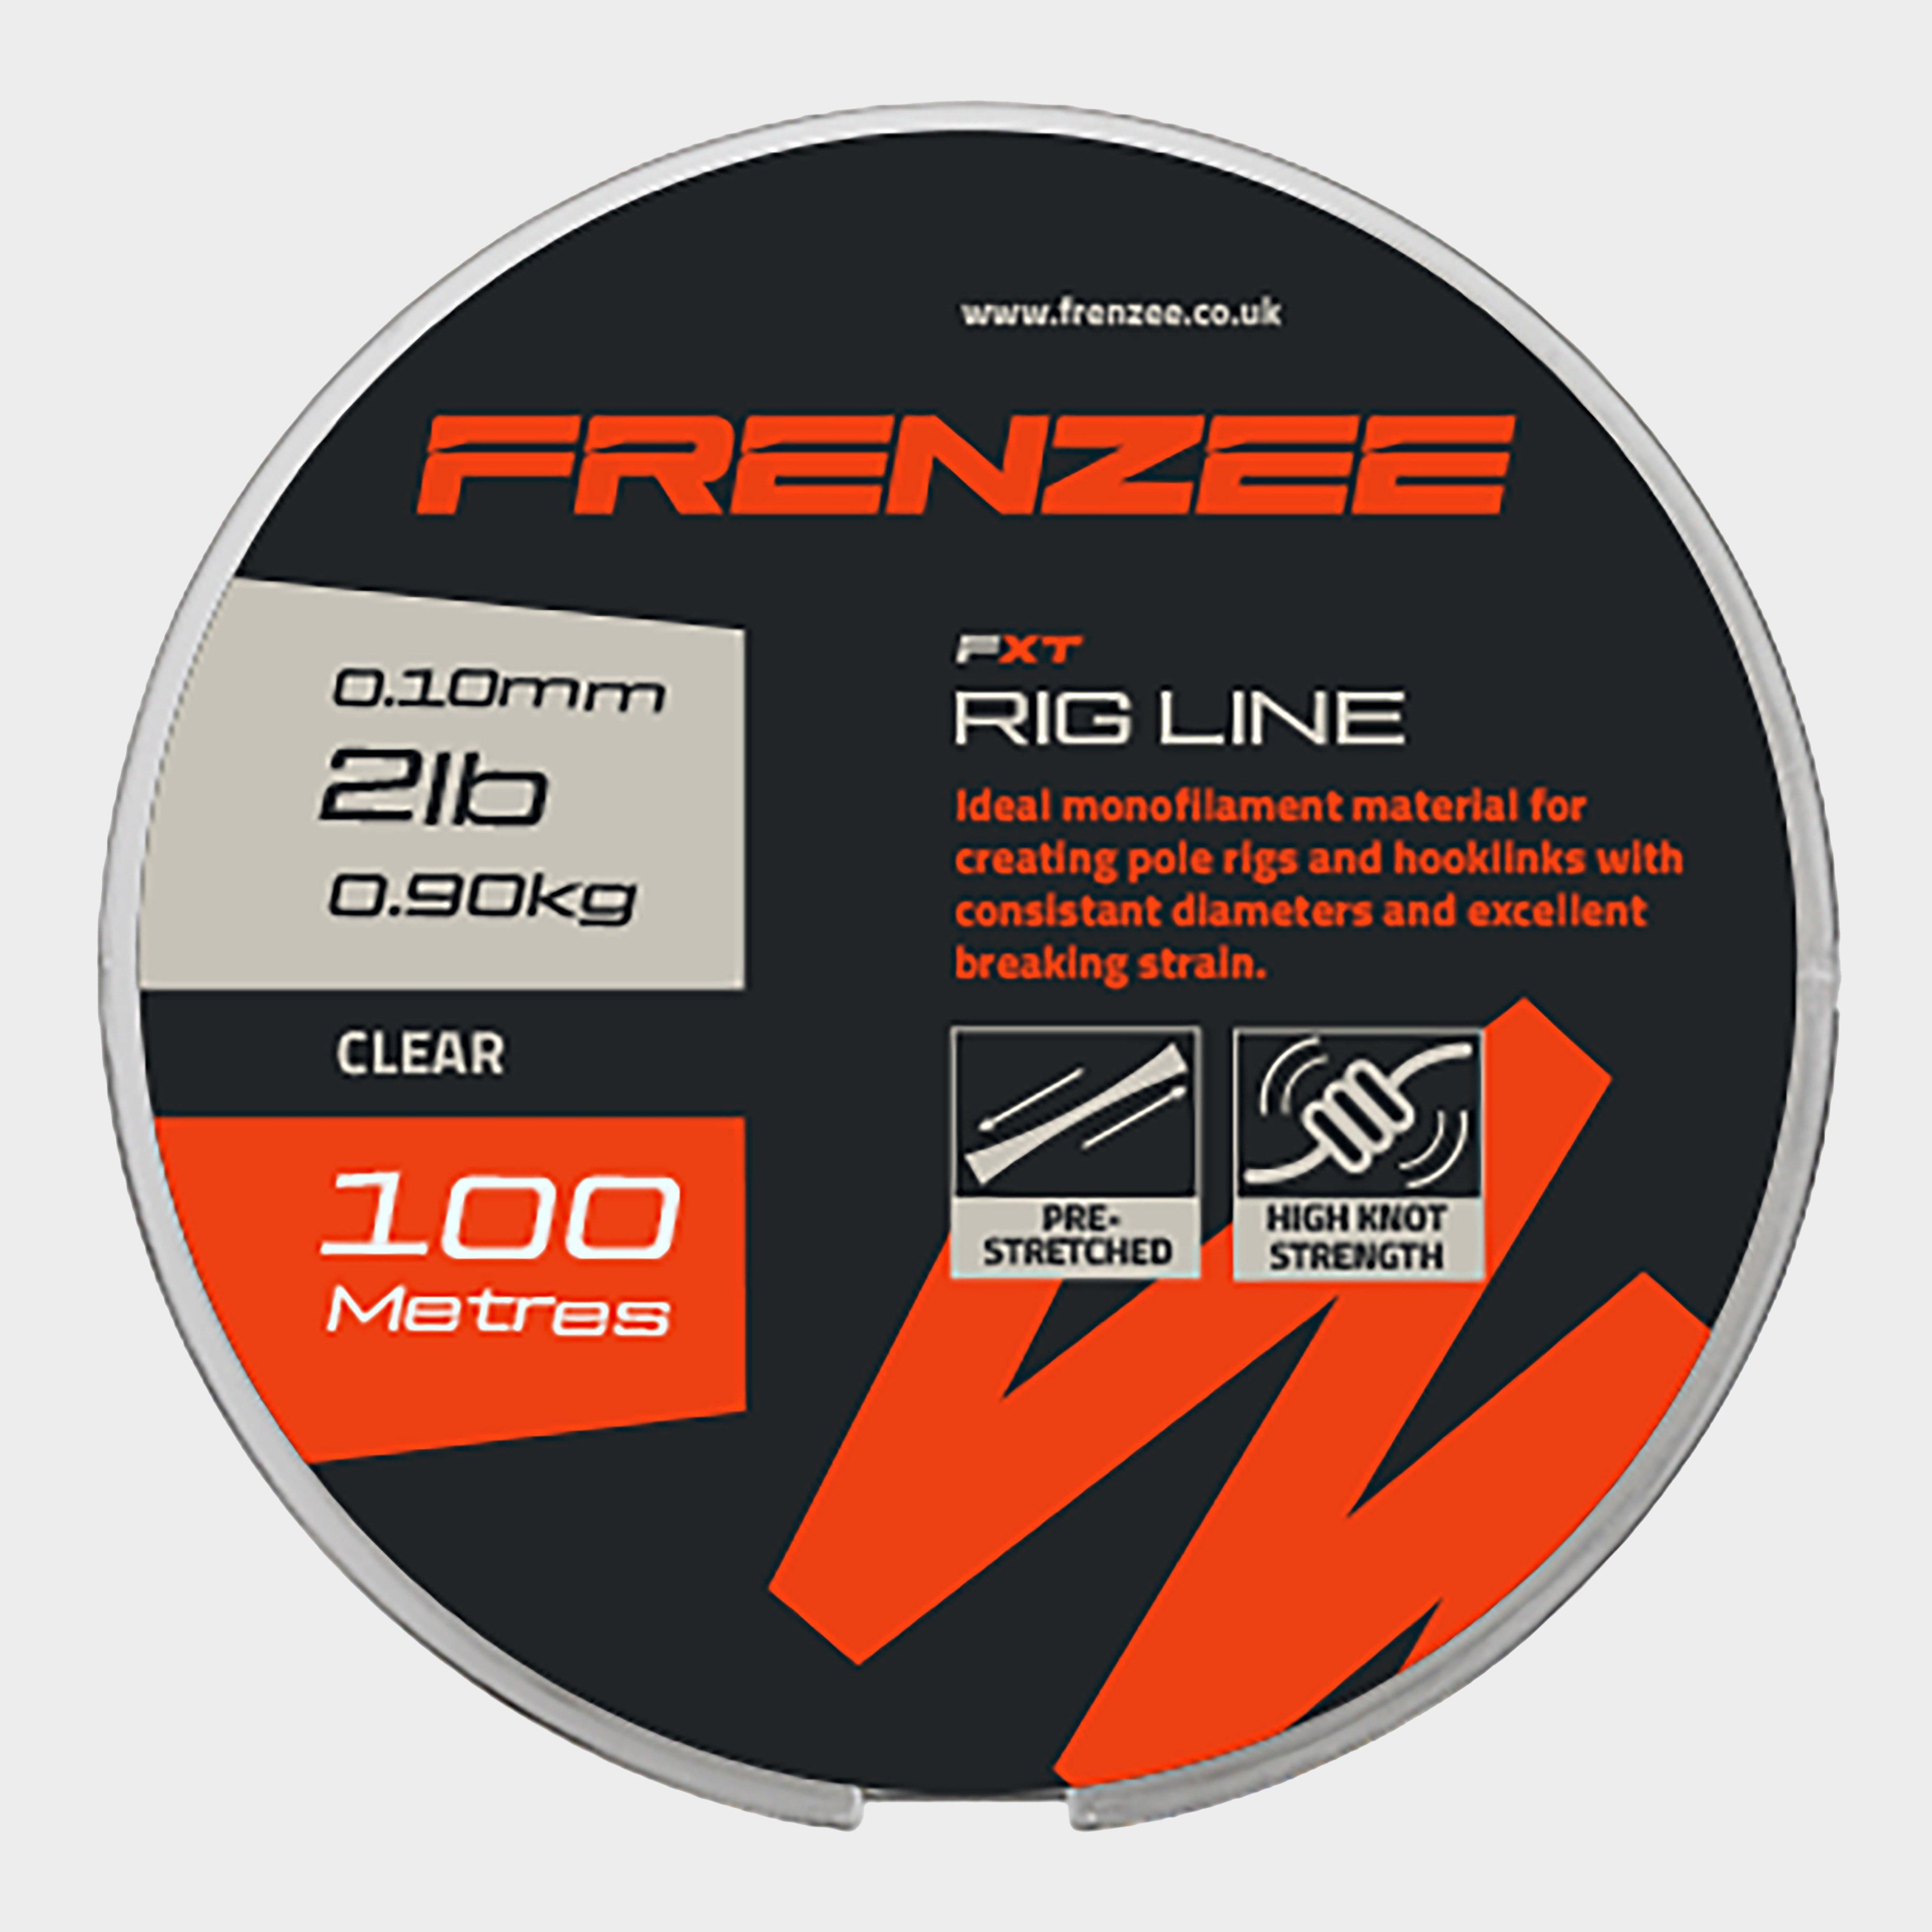 Photos - Fishing Line Clear Frenzee FXT Rig Line 0.10mm 0.90kg 2lb, 